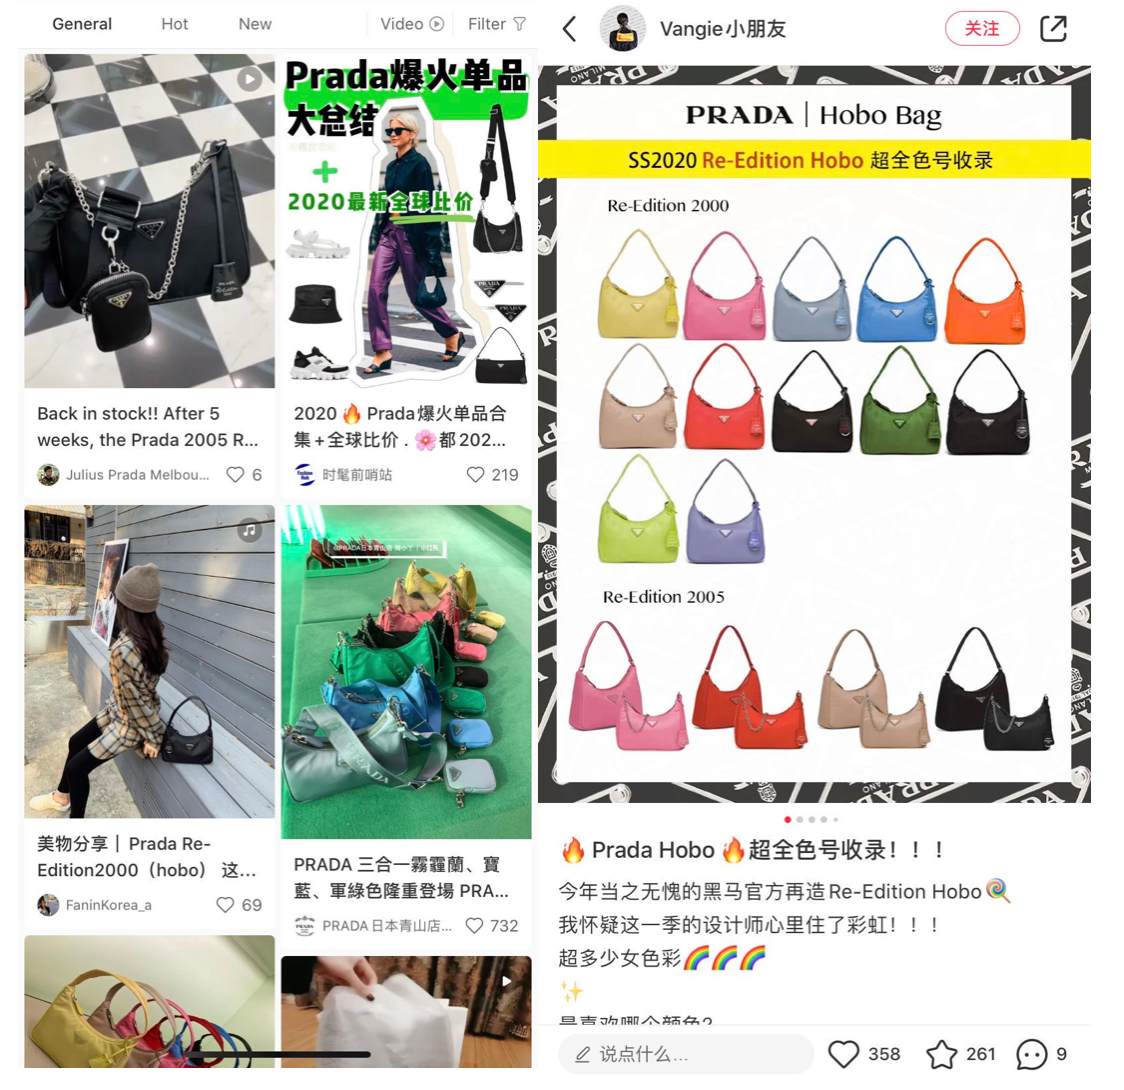 Prada's Re-Edition hobo bag is the IT bag in China, netizens already are sharing pricing of it in other part of the world. Photo: Little Red Book.